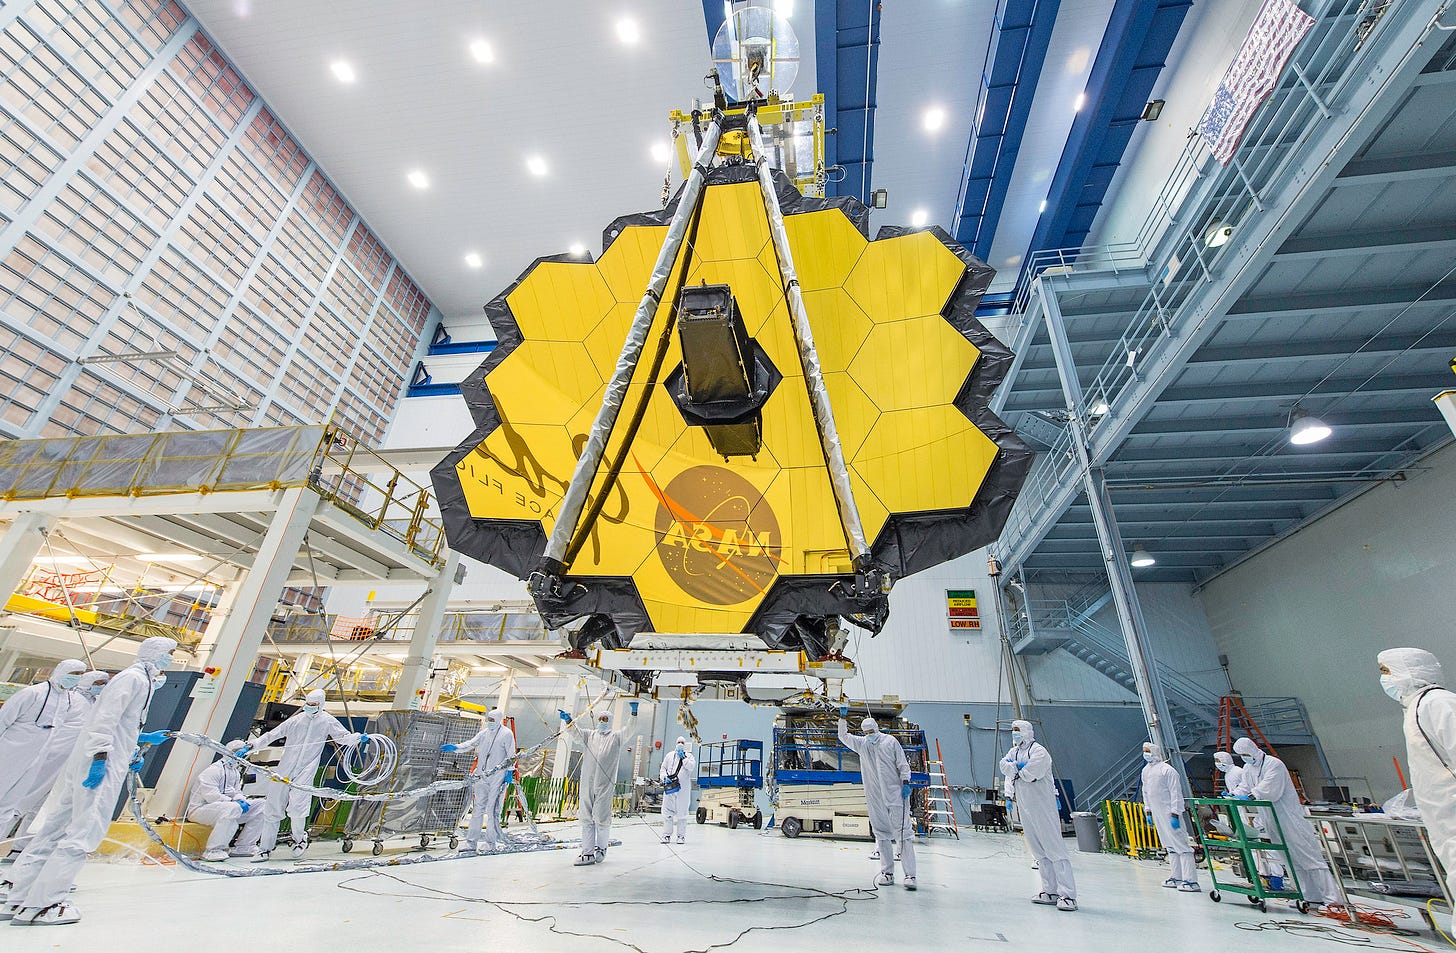 It's springtime and the deployed primary mirror of NASA's James Webb Space Telescope looks like a spring flower in full bloom.     In this photo, NASA technicians lifted the telescope using a crane and moved it inside a clean room at NASA’s Goddard Space Flight Center in Greenbelt, Maryland. Once launched into space, the Webb telescope’s 18-segmented gold mirror is specially designed to capture infrared light from the first galaxies that formed in the early Universe, and will help the telescope peer inside dust clouds where stars and planetary systems are forming today.